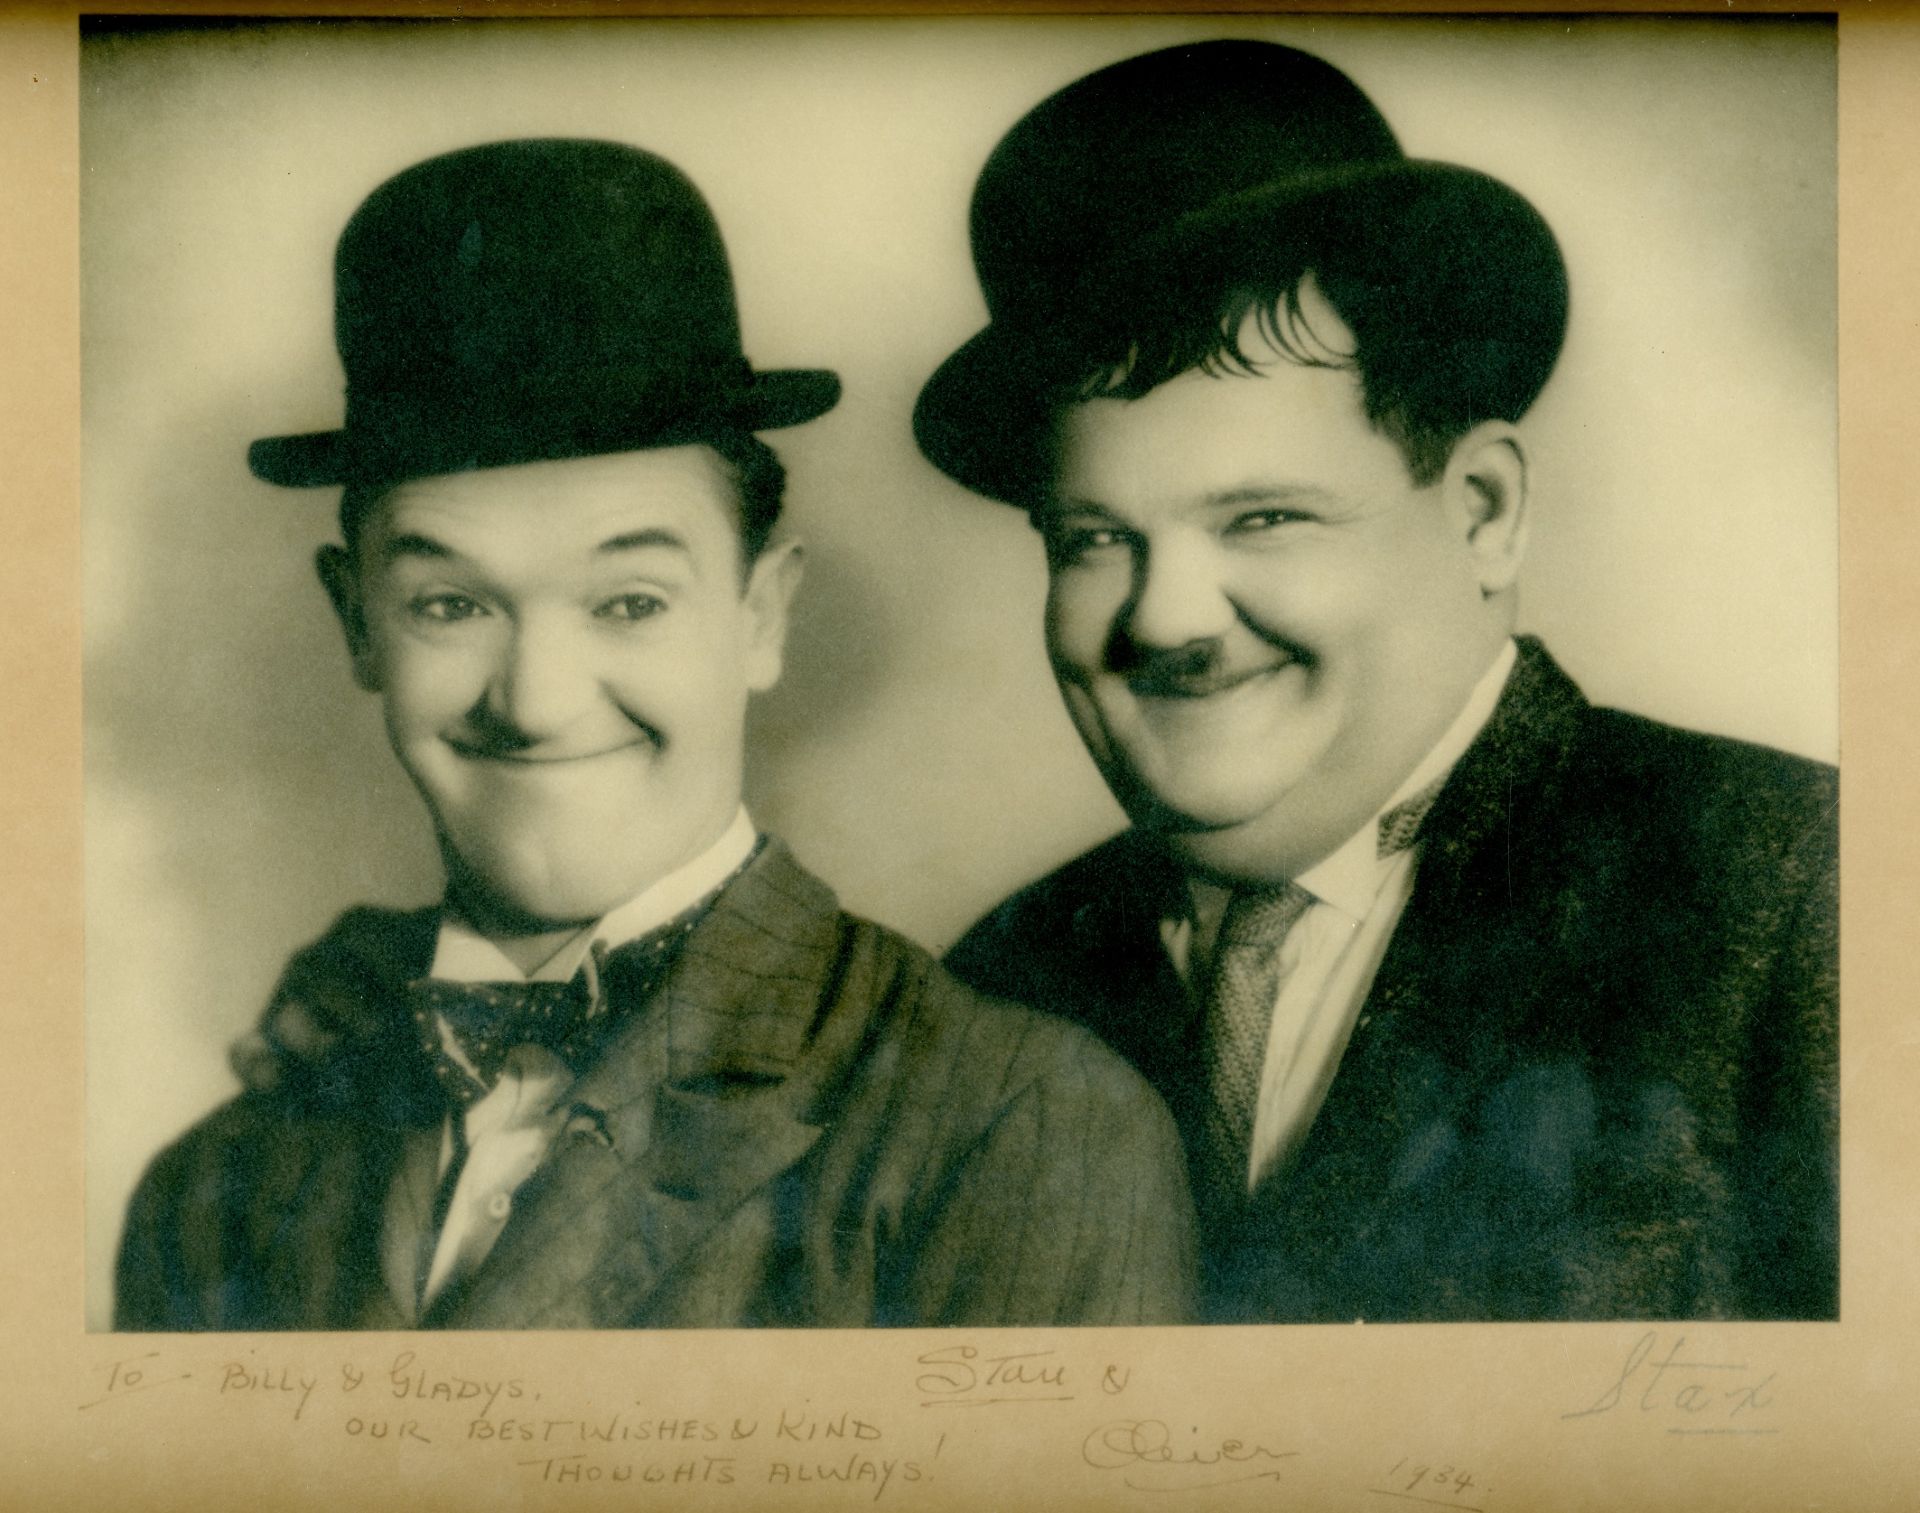 LAUREL & HARDY: LAUREL STAN (1890-1965) & HARDY OLIVER (1892-1957) English and American film